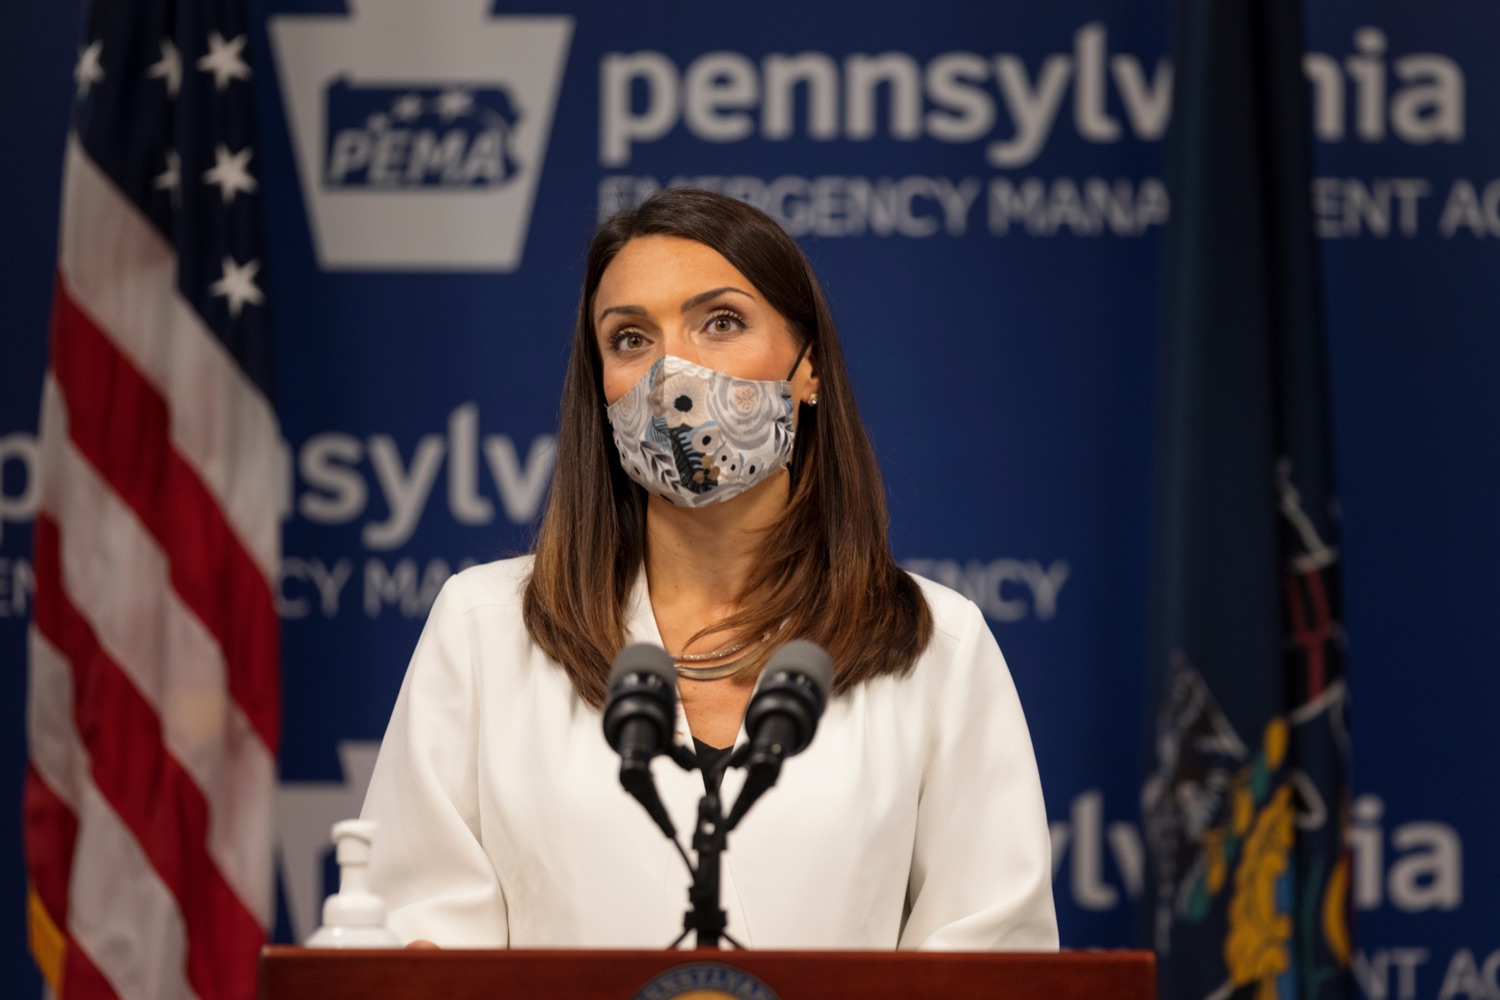 Acting Health Secretary Alison Beam speaks during a press conference, which discussed the current state of COVID-19 and a new Secretary of Health order requiring masks to be worn inside K-12 school buildings, early learning programs and child care providers, inside Pennsylvania Emergency Management Agency in Harrisburg on Tuesday, August 31, 2021.<br><a href="https://filesource.amperwave.net/commonwealthofpa/photo/19089_GOV_School_Masking_NK_010.jpg" target="_blank">⇣ Download Photo</a>